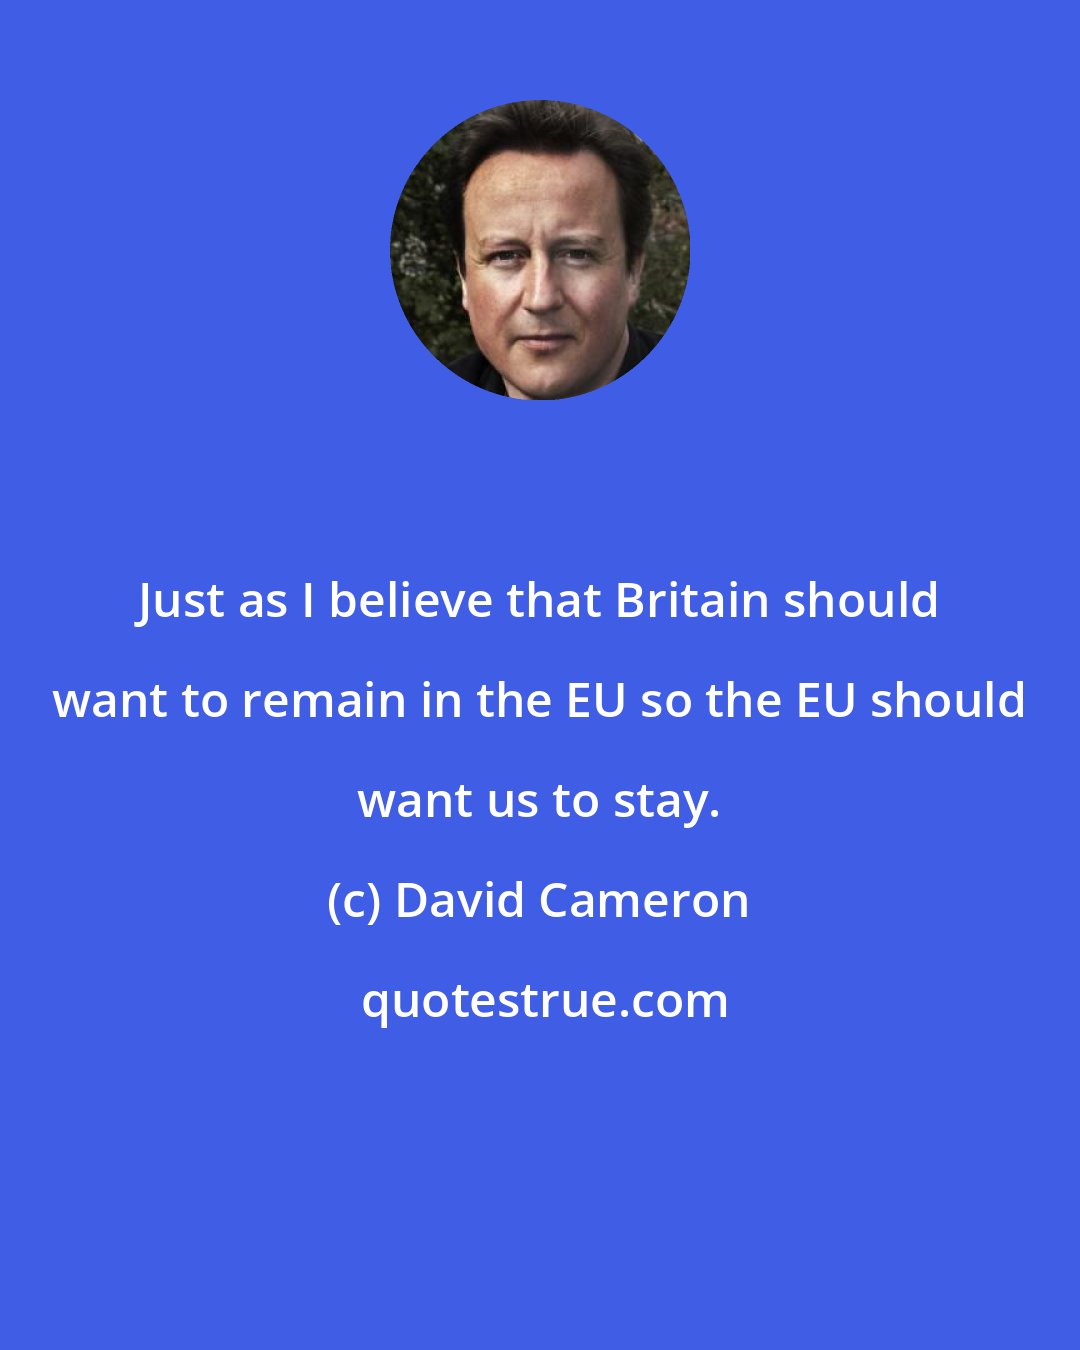 David Cameron: Just as I believe that Britain should want to remain in the EU so the EU should want us to stay.